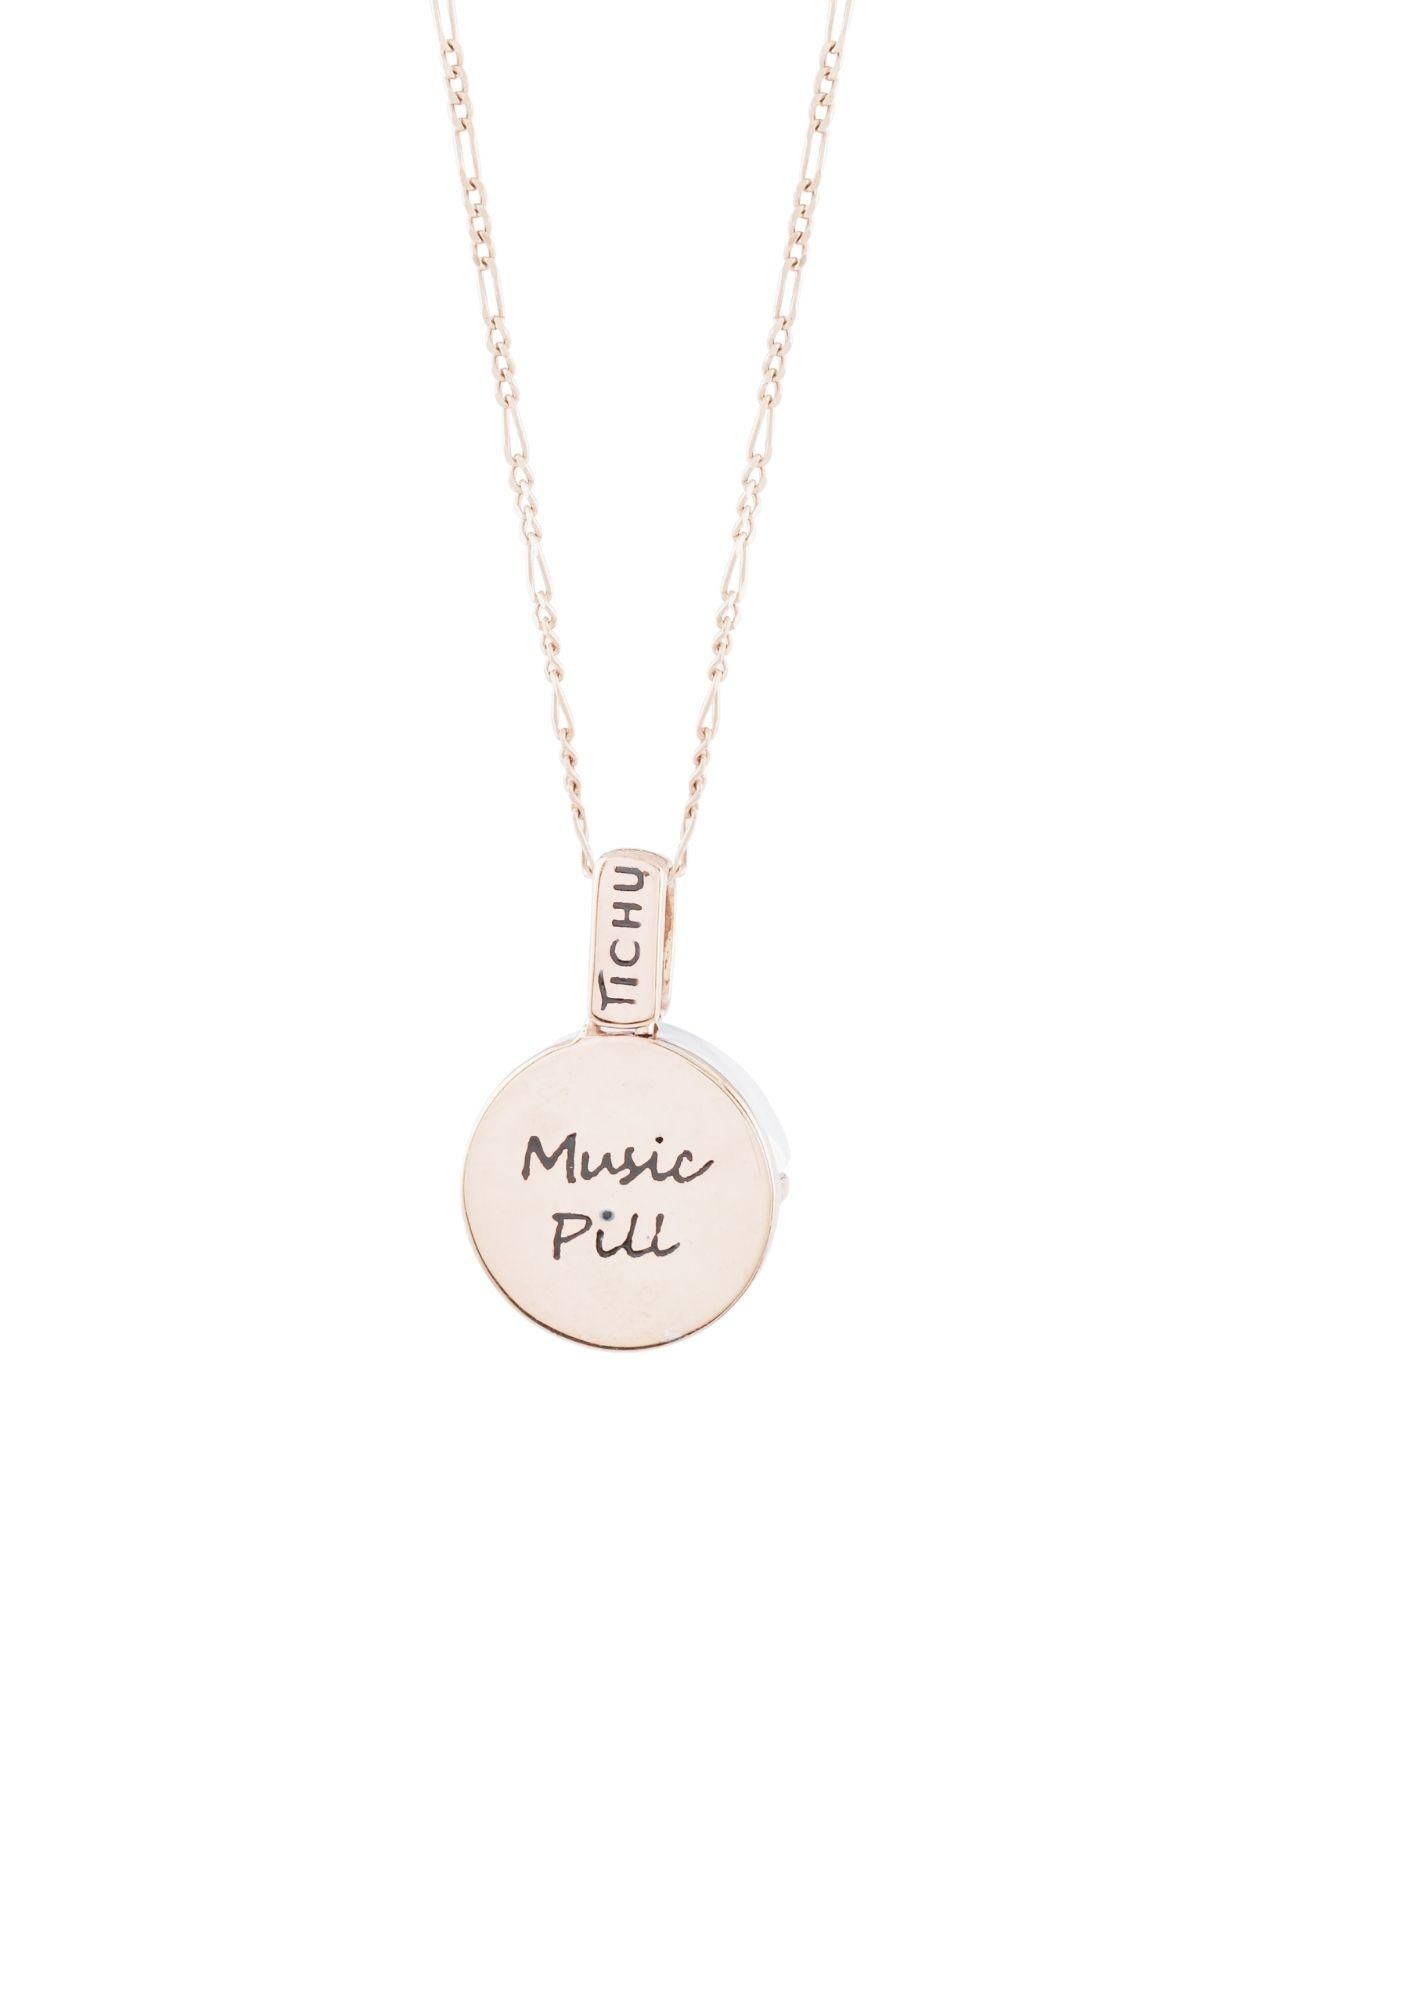 Melodies and clear crystal attract harmony. The Melody Pill has been crafted with the thought to draw away chaos and ignite calm within your soul.

Each Music Pill Pendant is handcrafted in Sterling Silver, specially Pill cut Crystal Quartz. The use